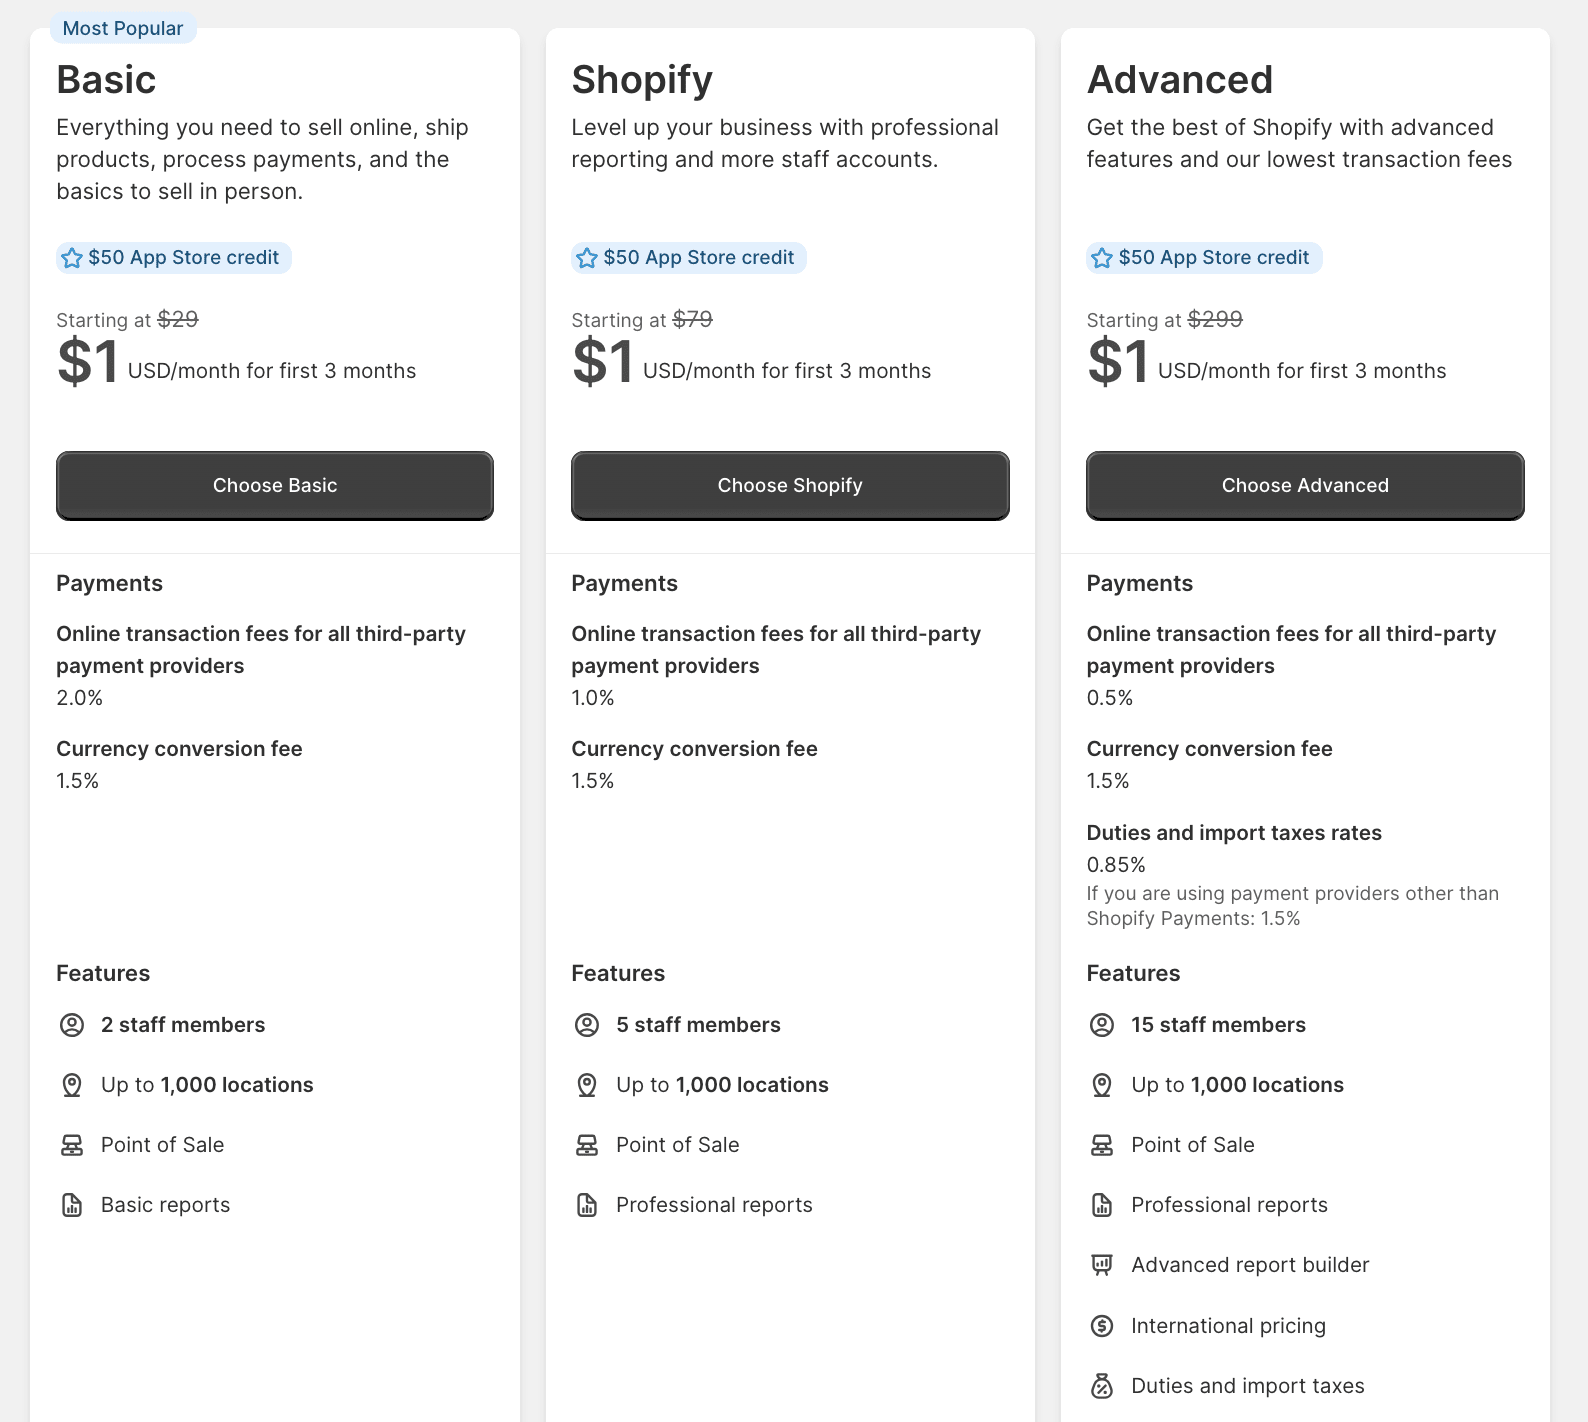 The three plans offered by Shopify, their pricing, and their features.